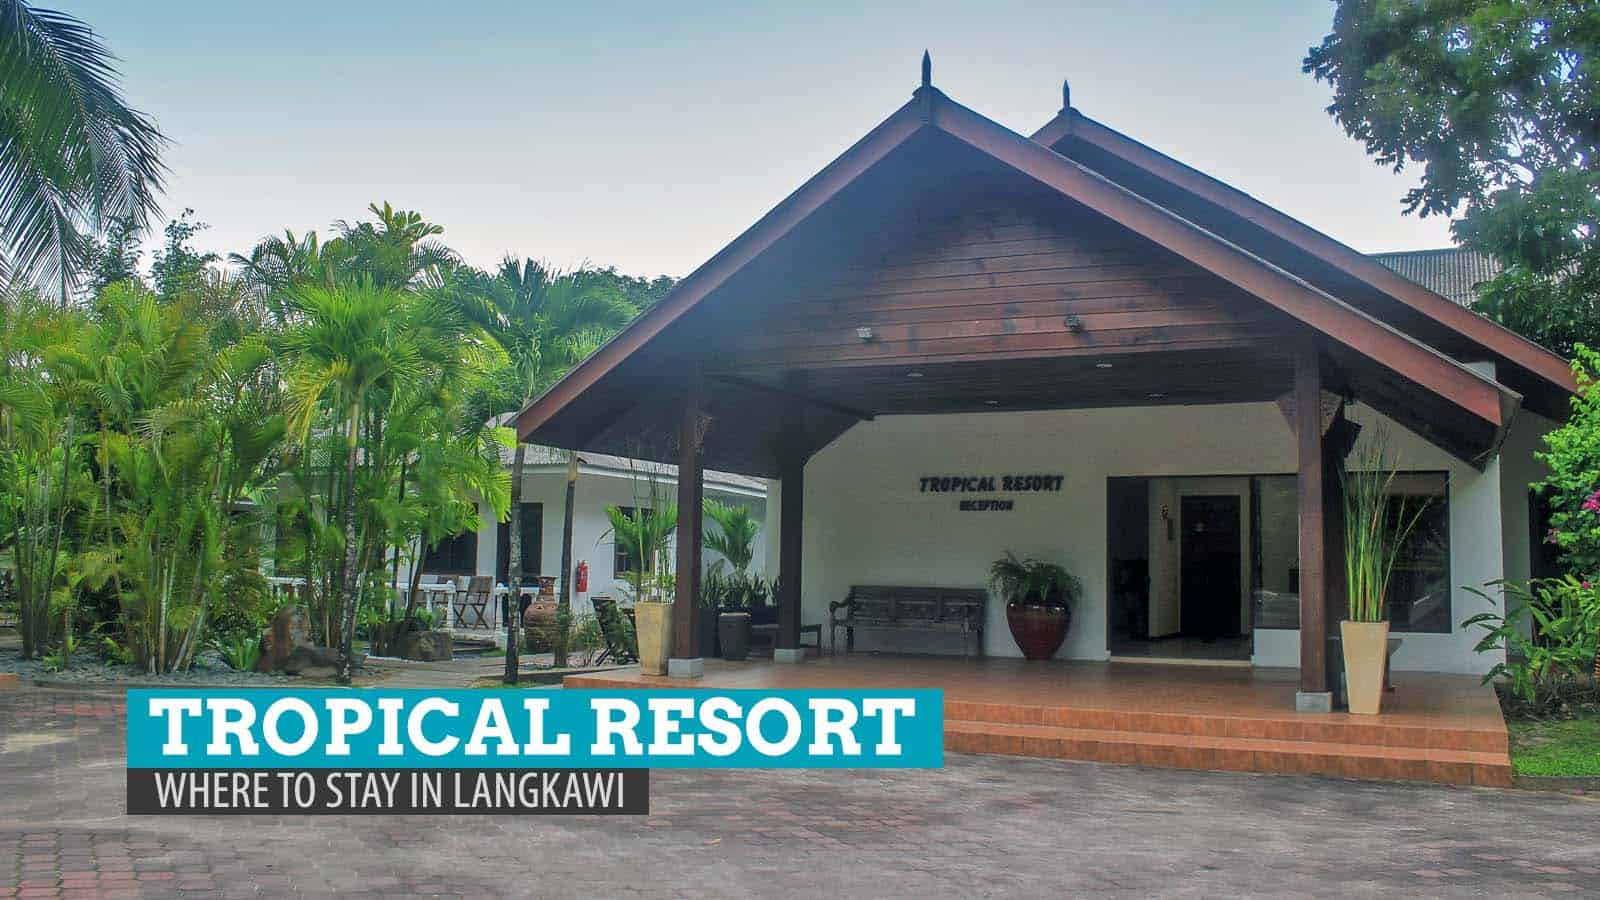 Tropical Resort: Where to Stay in Langkawi, Malaysia